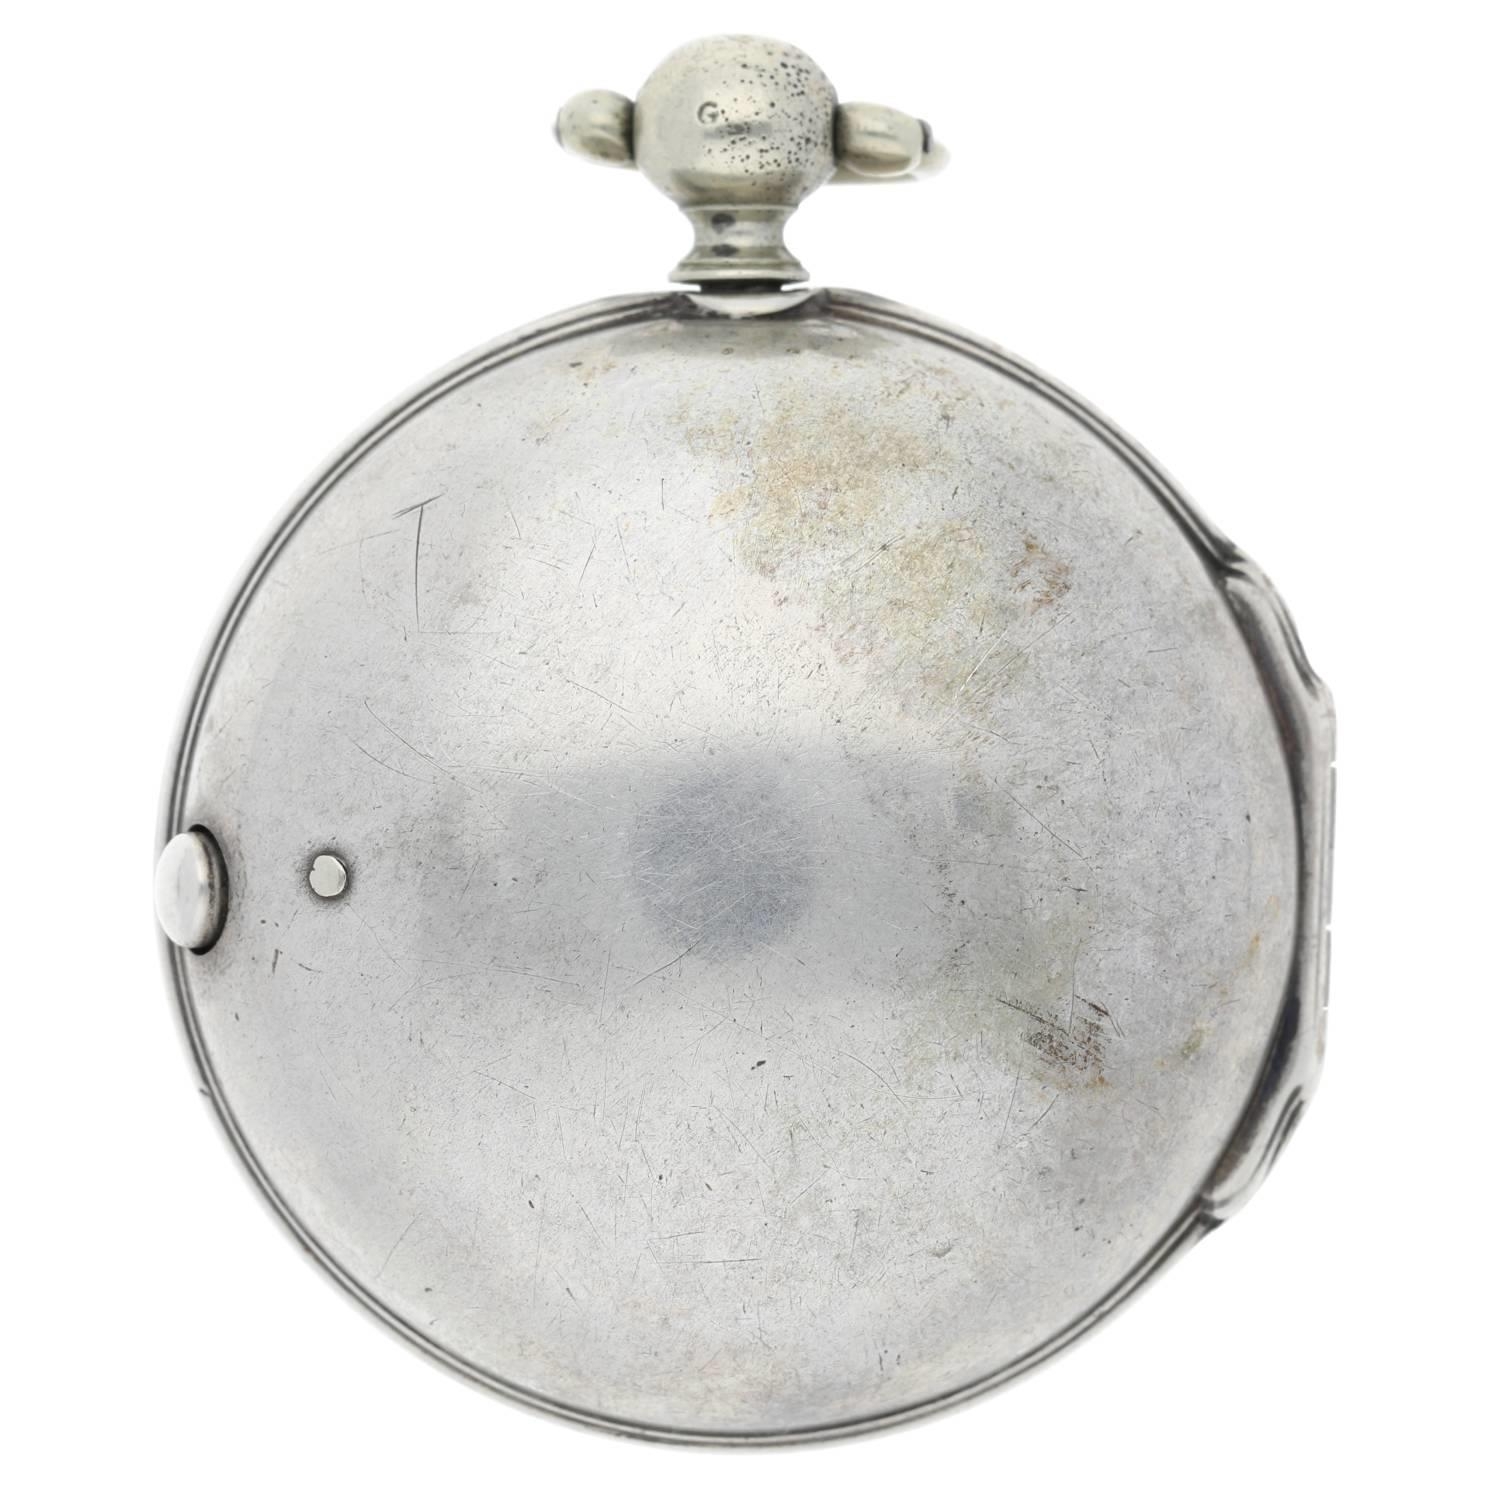 William Knight, West Marden - mid-18th century English silver pair cased verge pocket watch, - Image 8 of 10